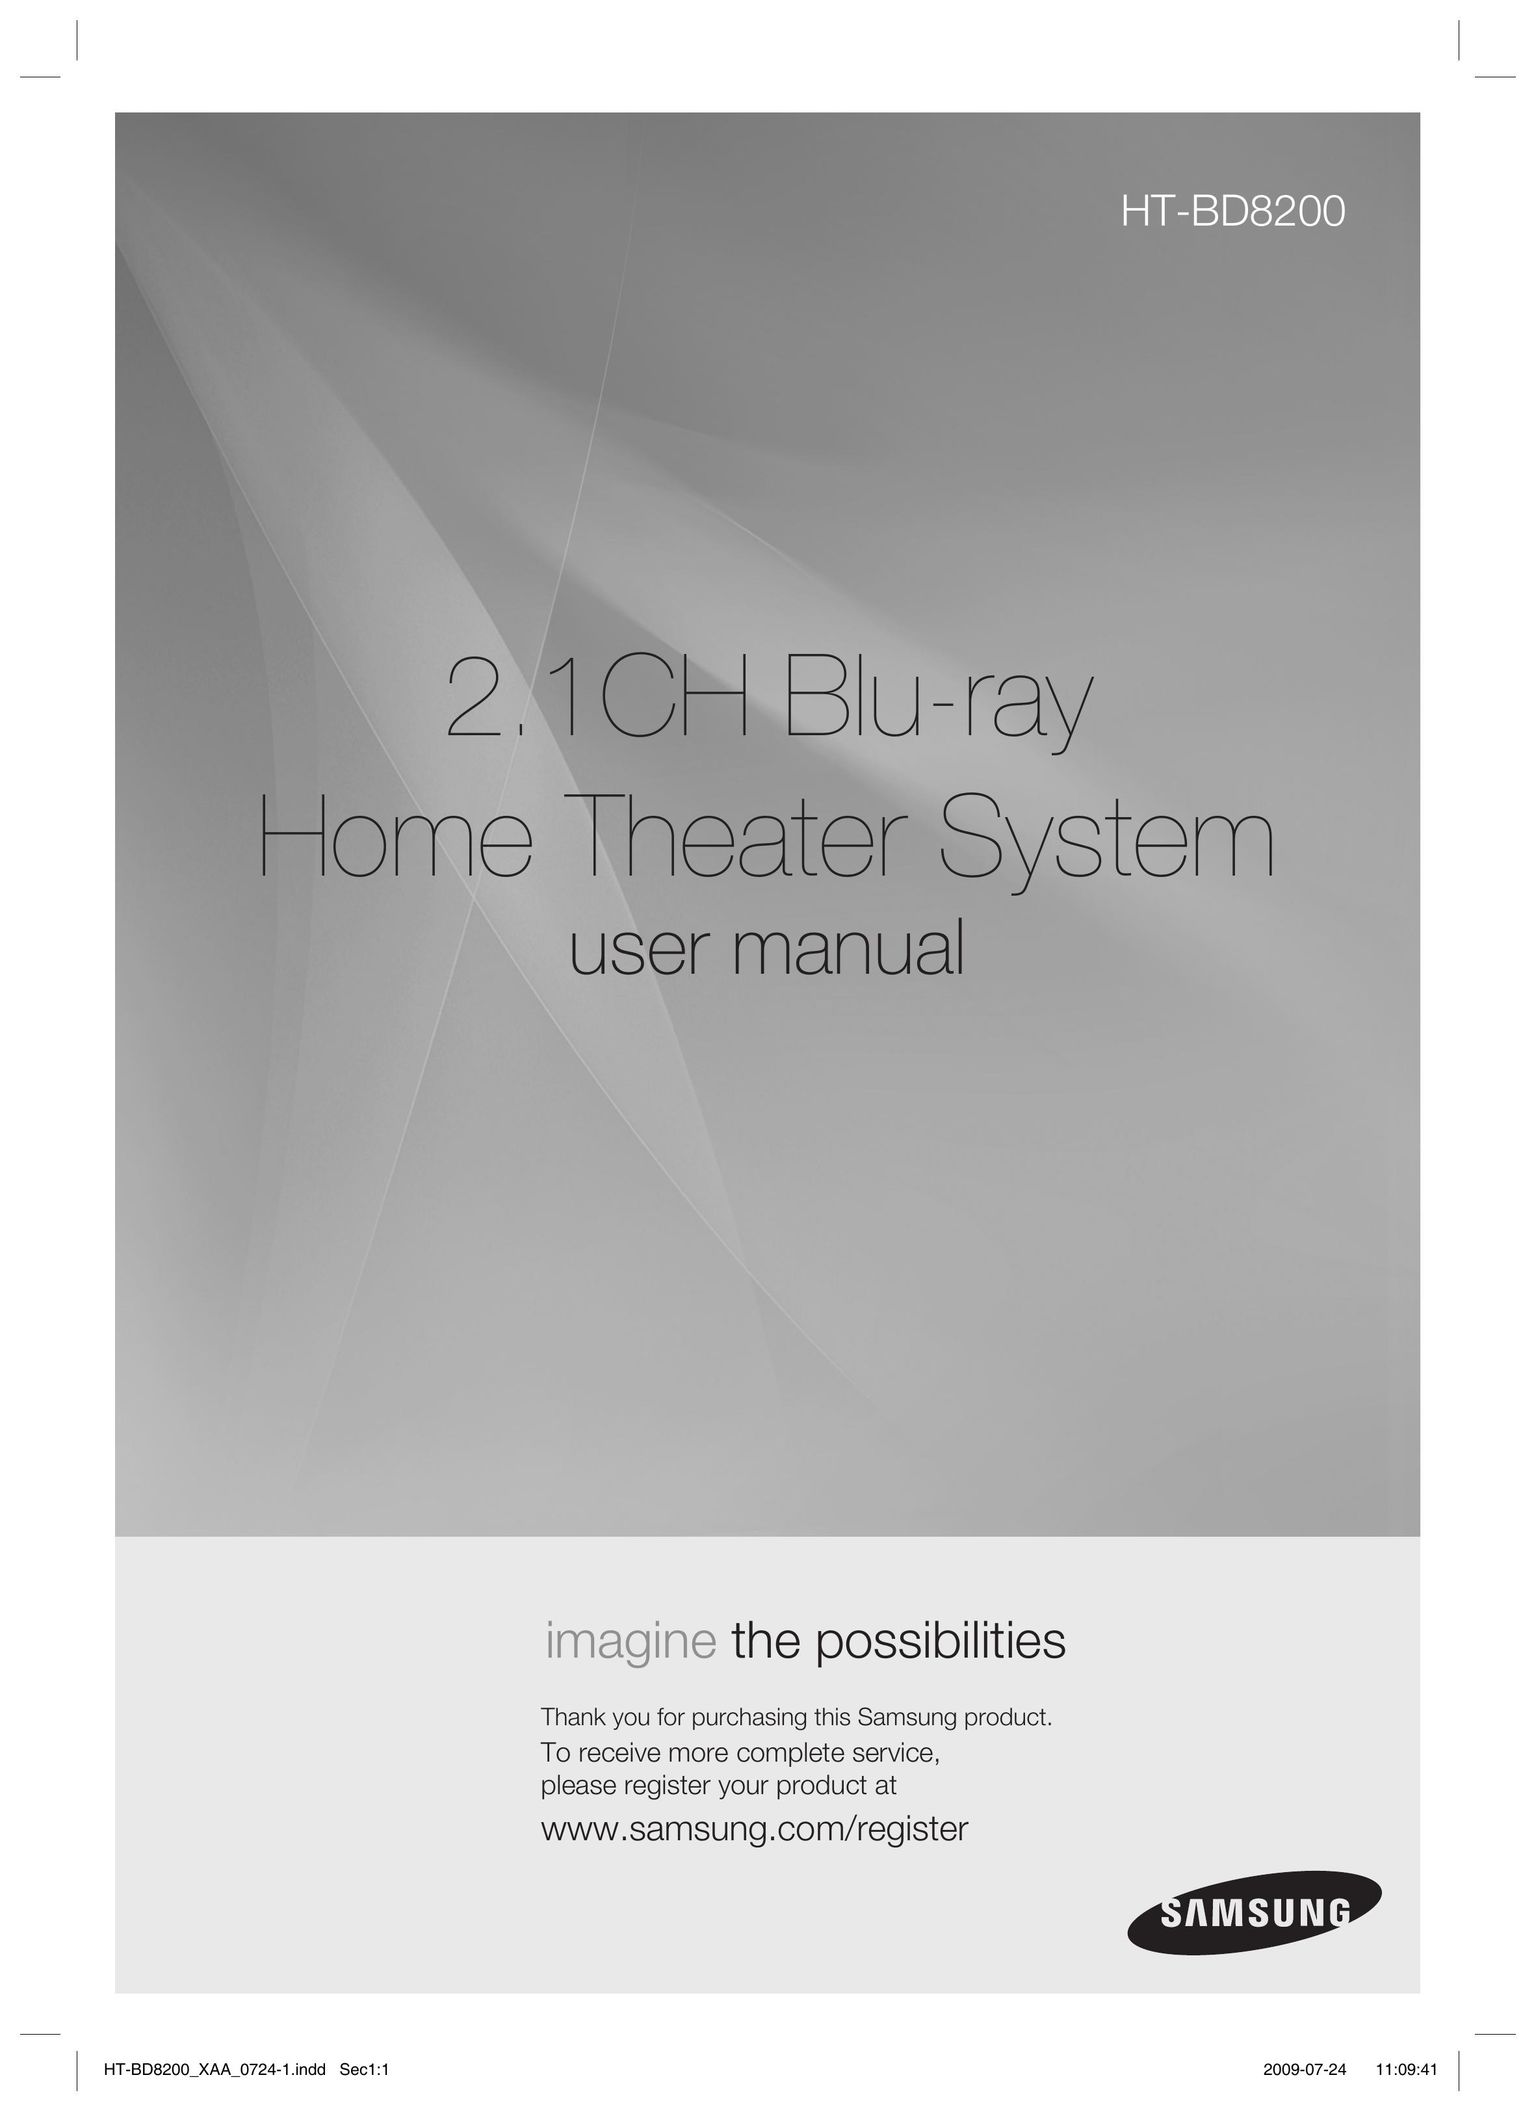 Samsung HT-BD8200 Stereo System User Manual